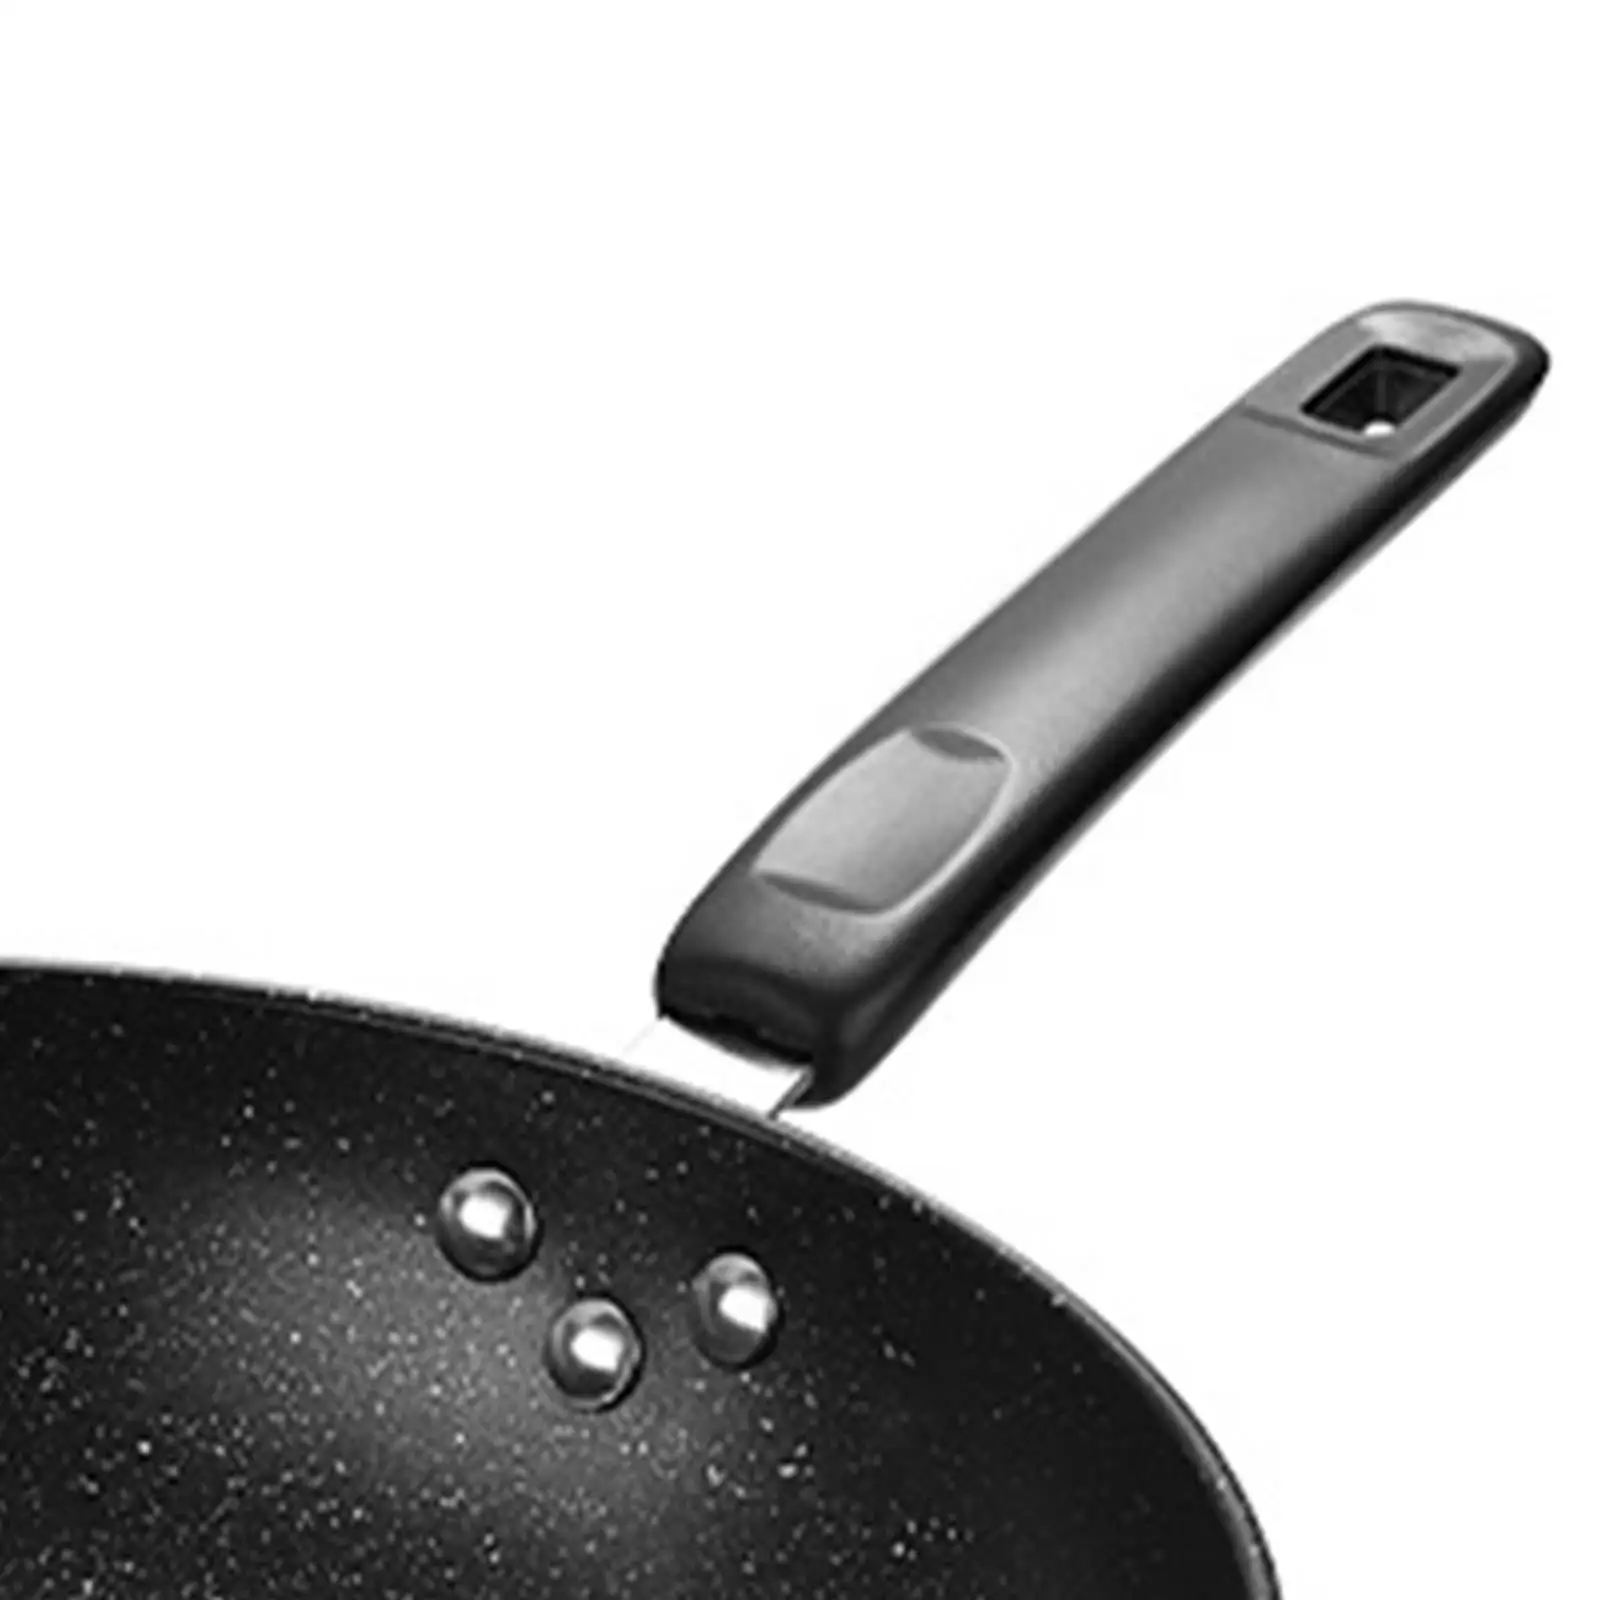 Frying Pan Frypan Stone Coating Cookware 30cm Non Stick Skillet Egg Pan Saute Pan for Restaurant Kitchen All Stovetop